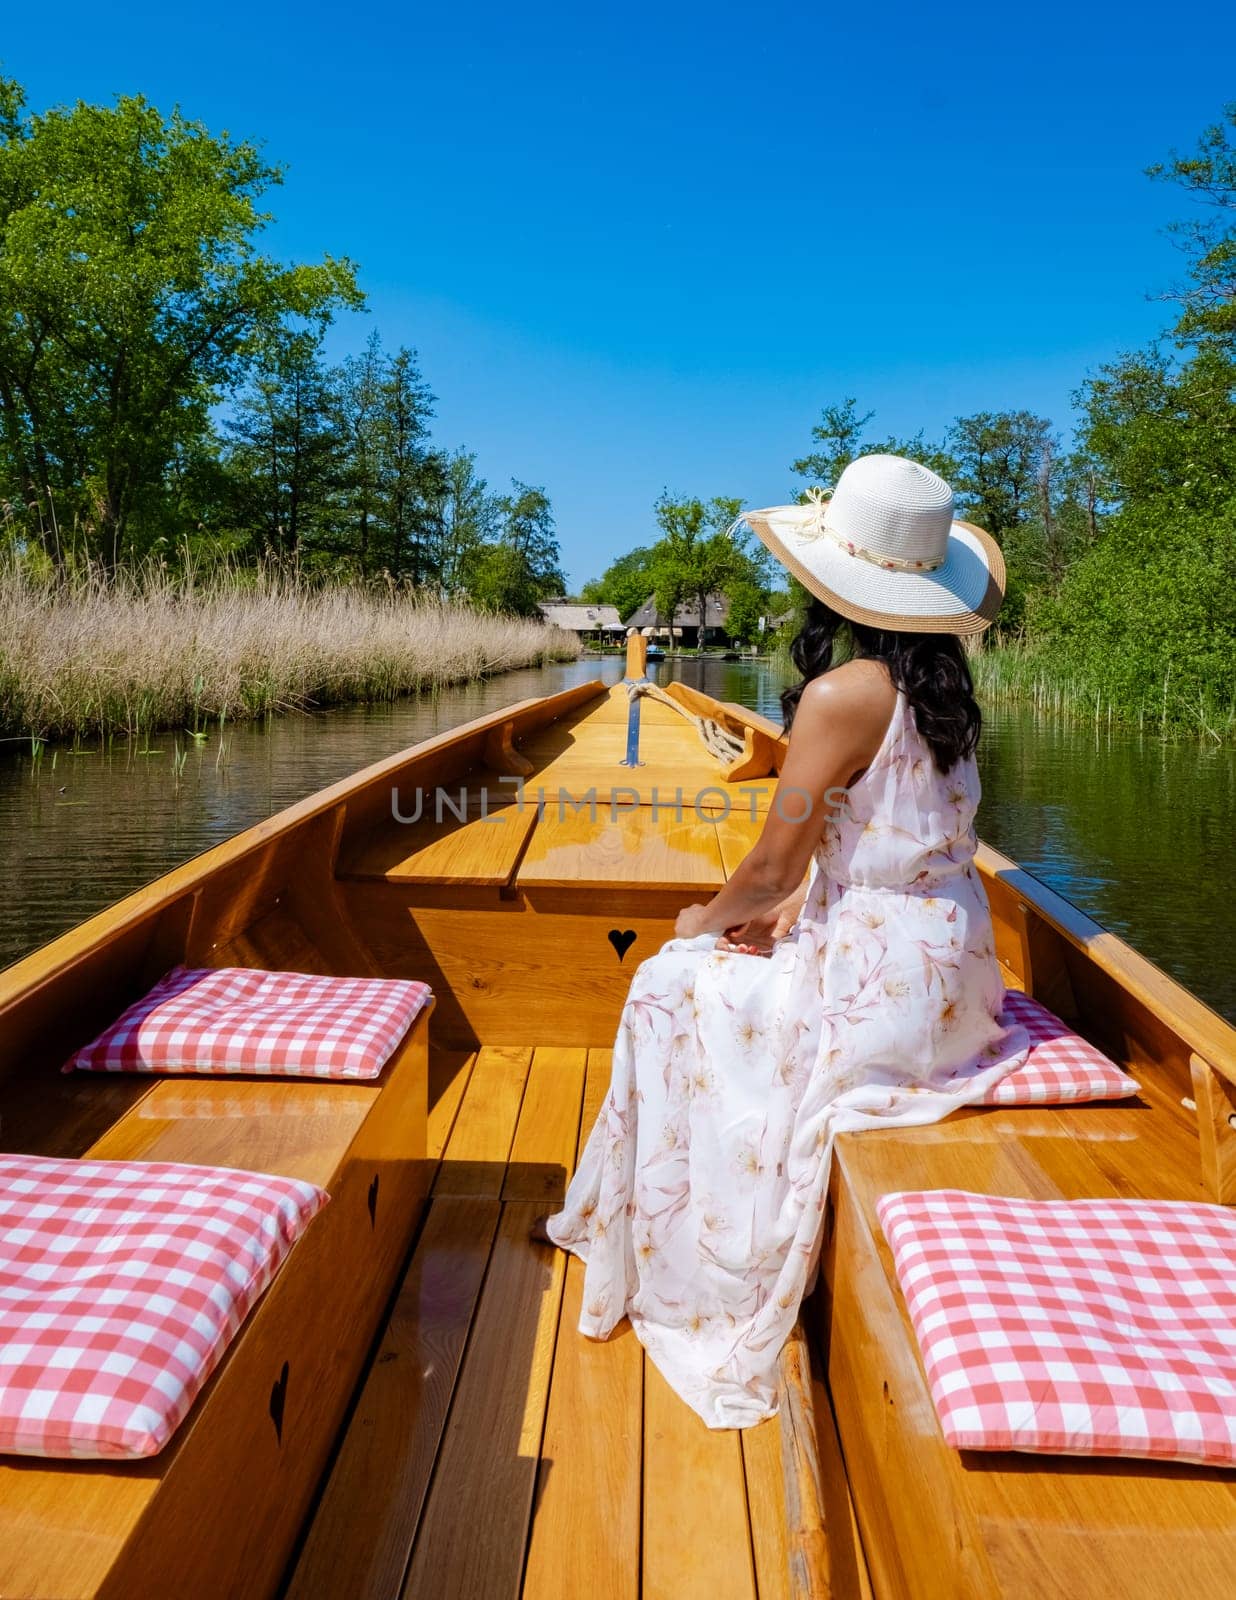 Asian women visit Giethoorn Netherlands, Asian female visit the village with a boat, view of the famous village with canals and rustic thatched roof houses in the Netherlands alongside the canals